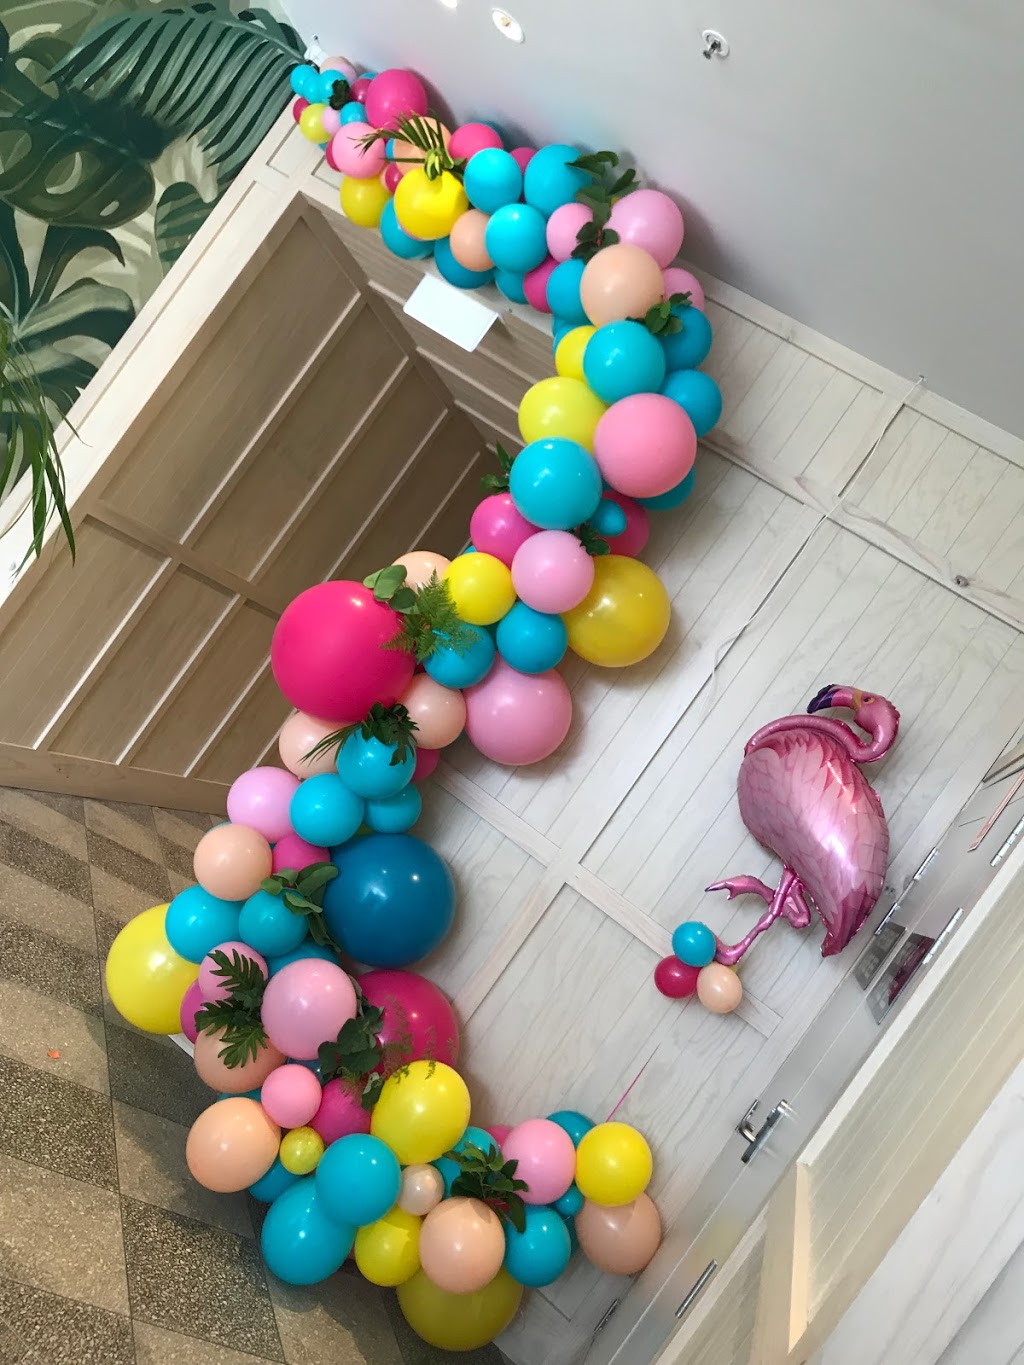 Balloon Inflation - Balloon Delivery and Balloon Shop in Sydney | home goods store | 266 Mitchell Rd, Alexandria NSW 2015, Australia | 0295193322 OR +61 2 9519 3322